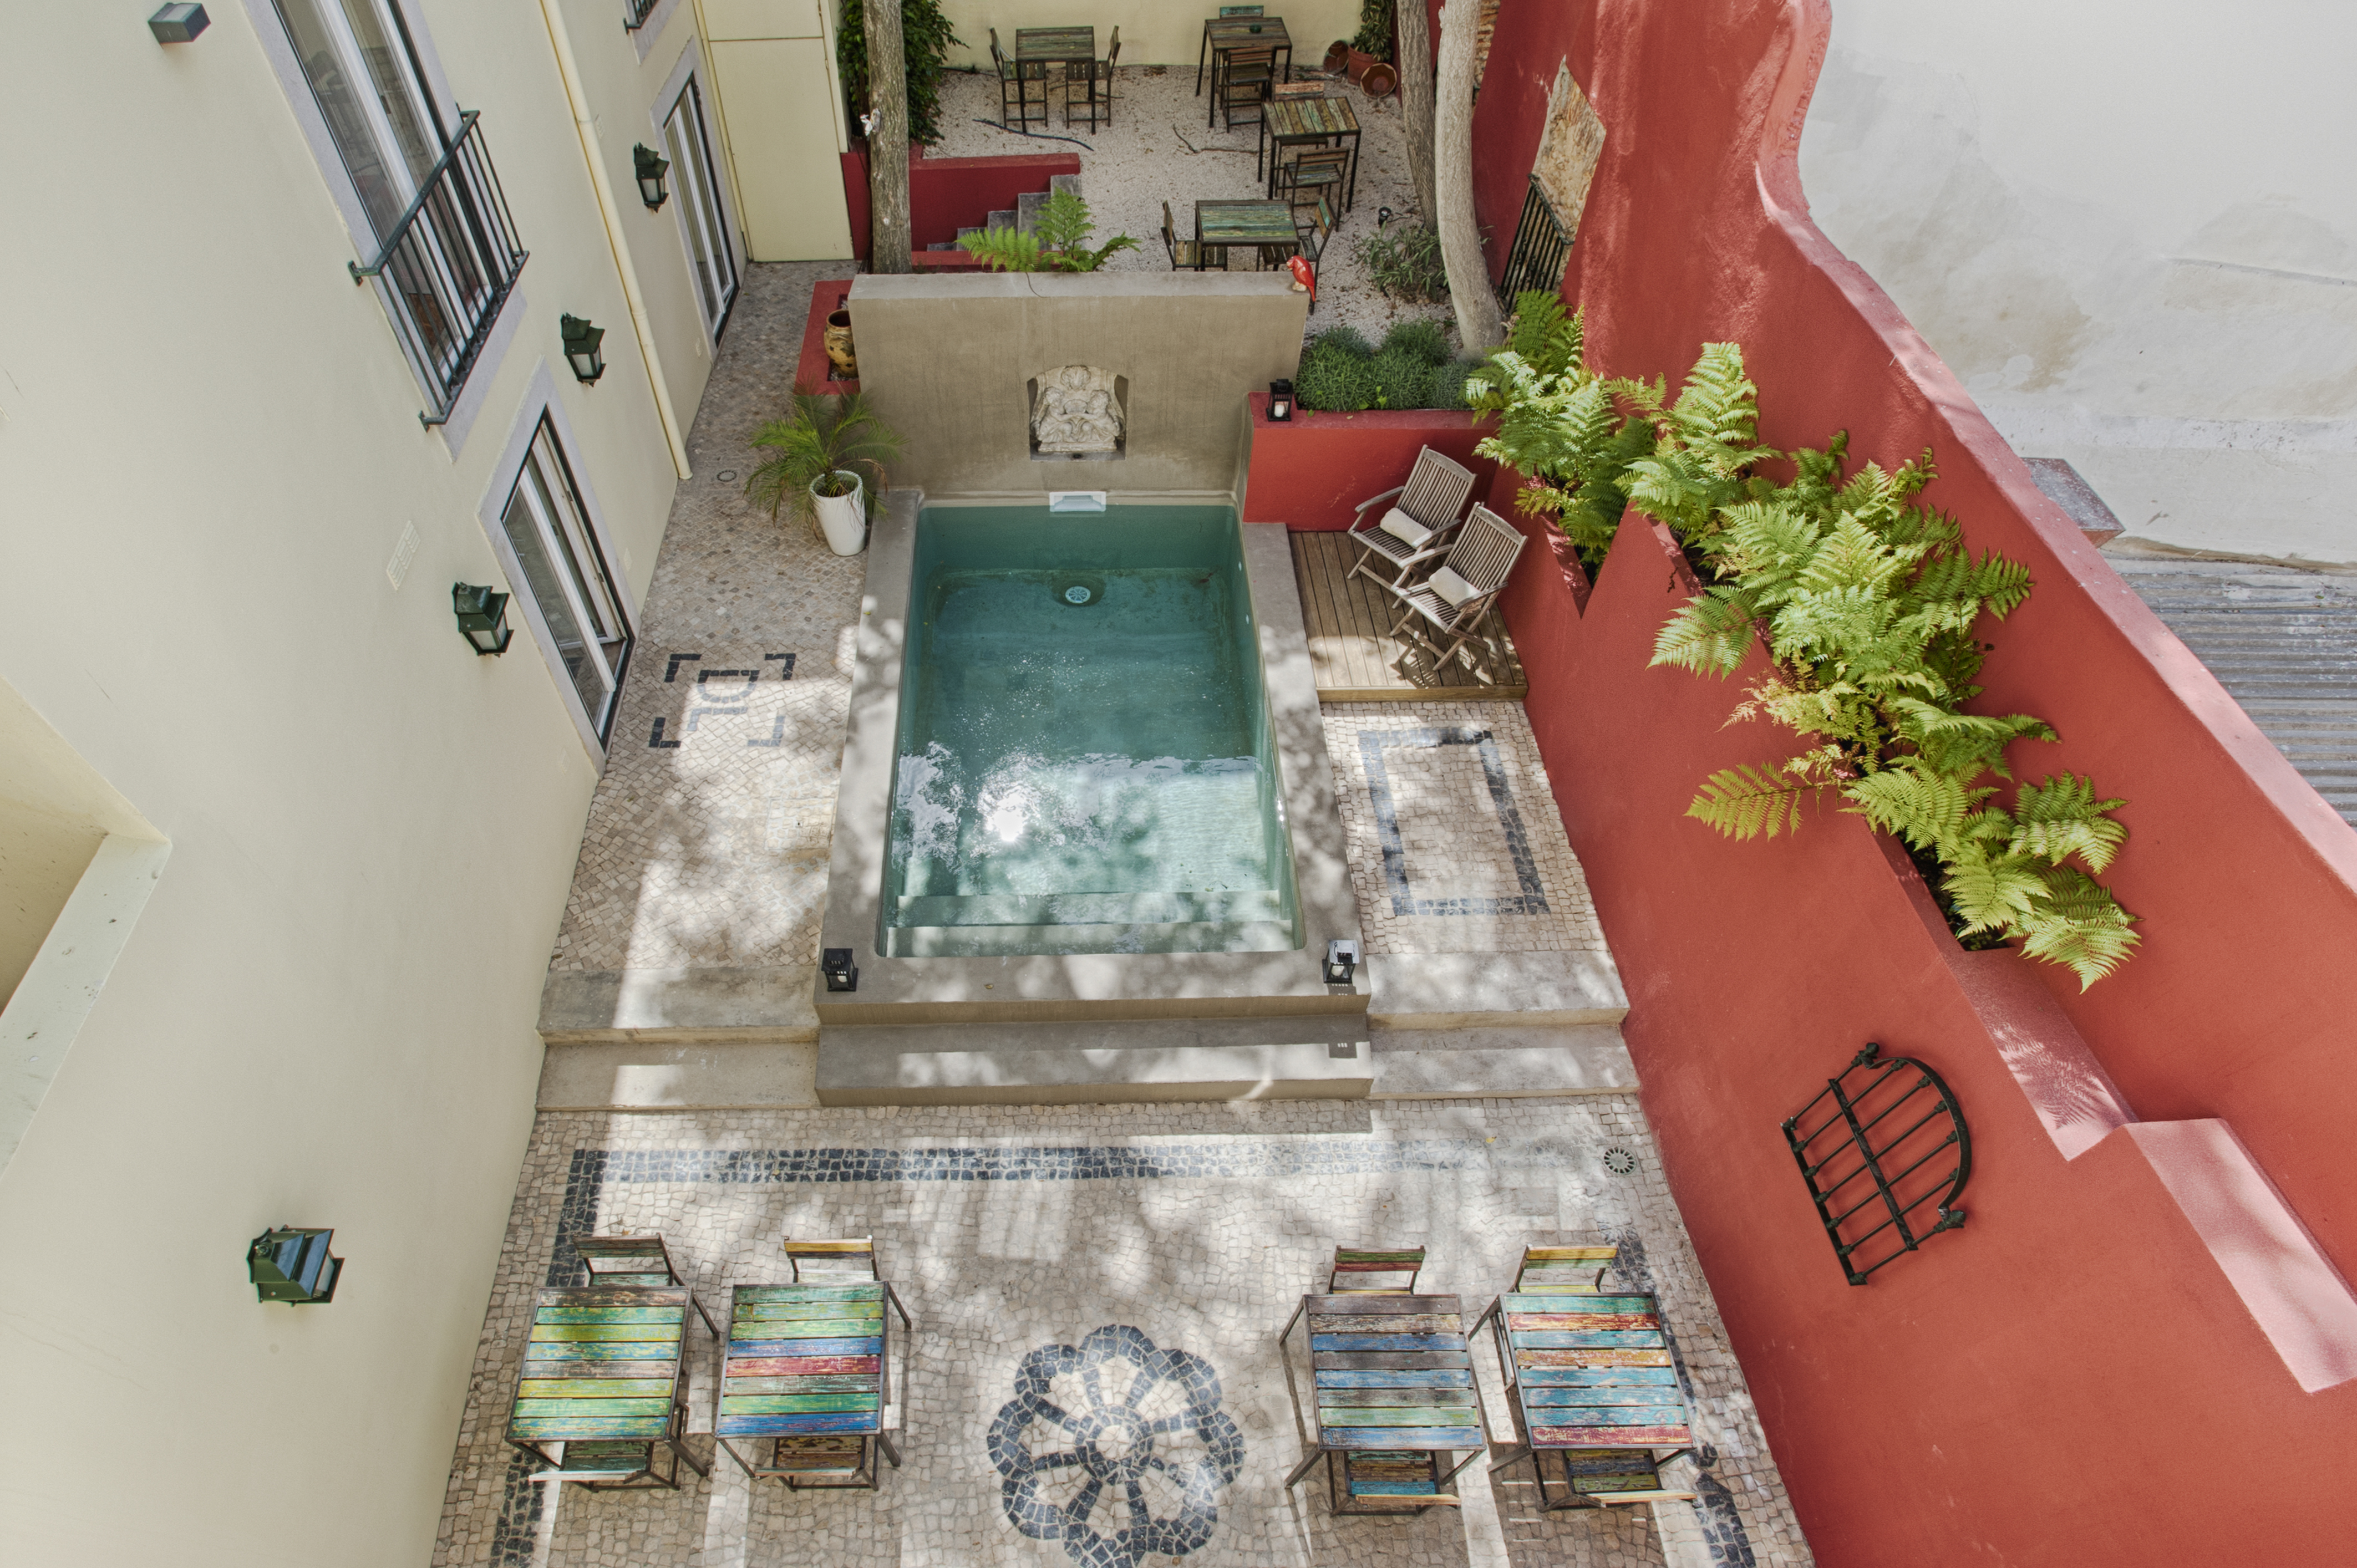 Best Places to Stay in Lisbon - Dear Lisbon Charming House in Santa Catarina with Outdoor Pool and Terrace